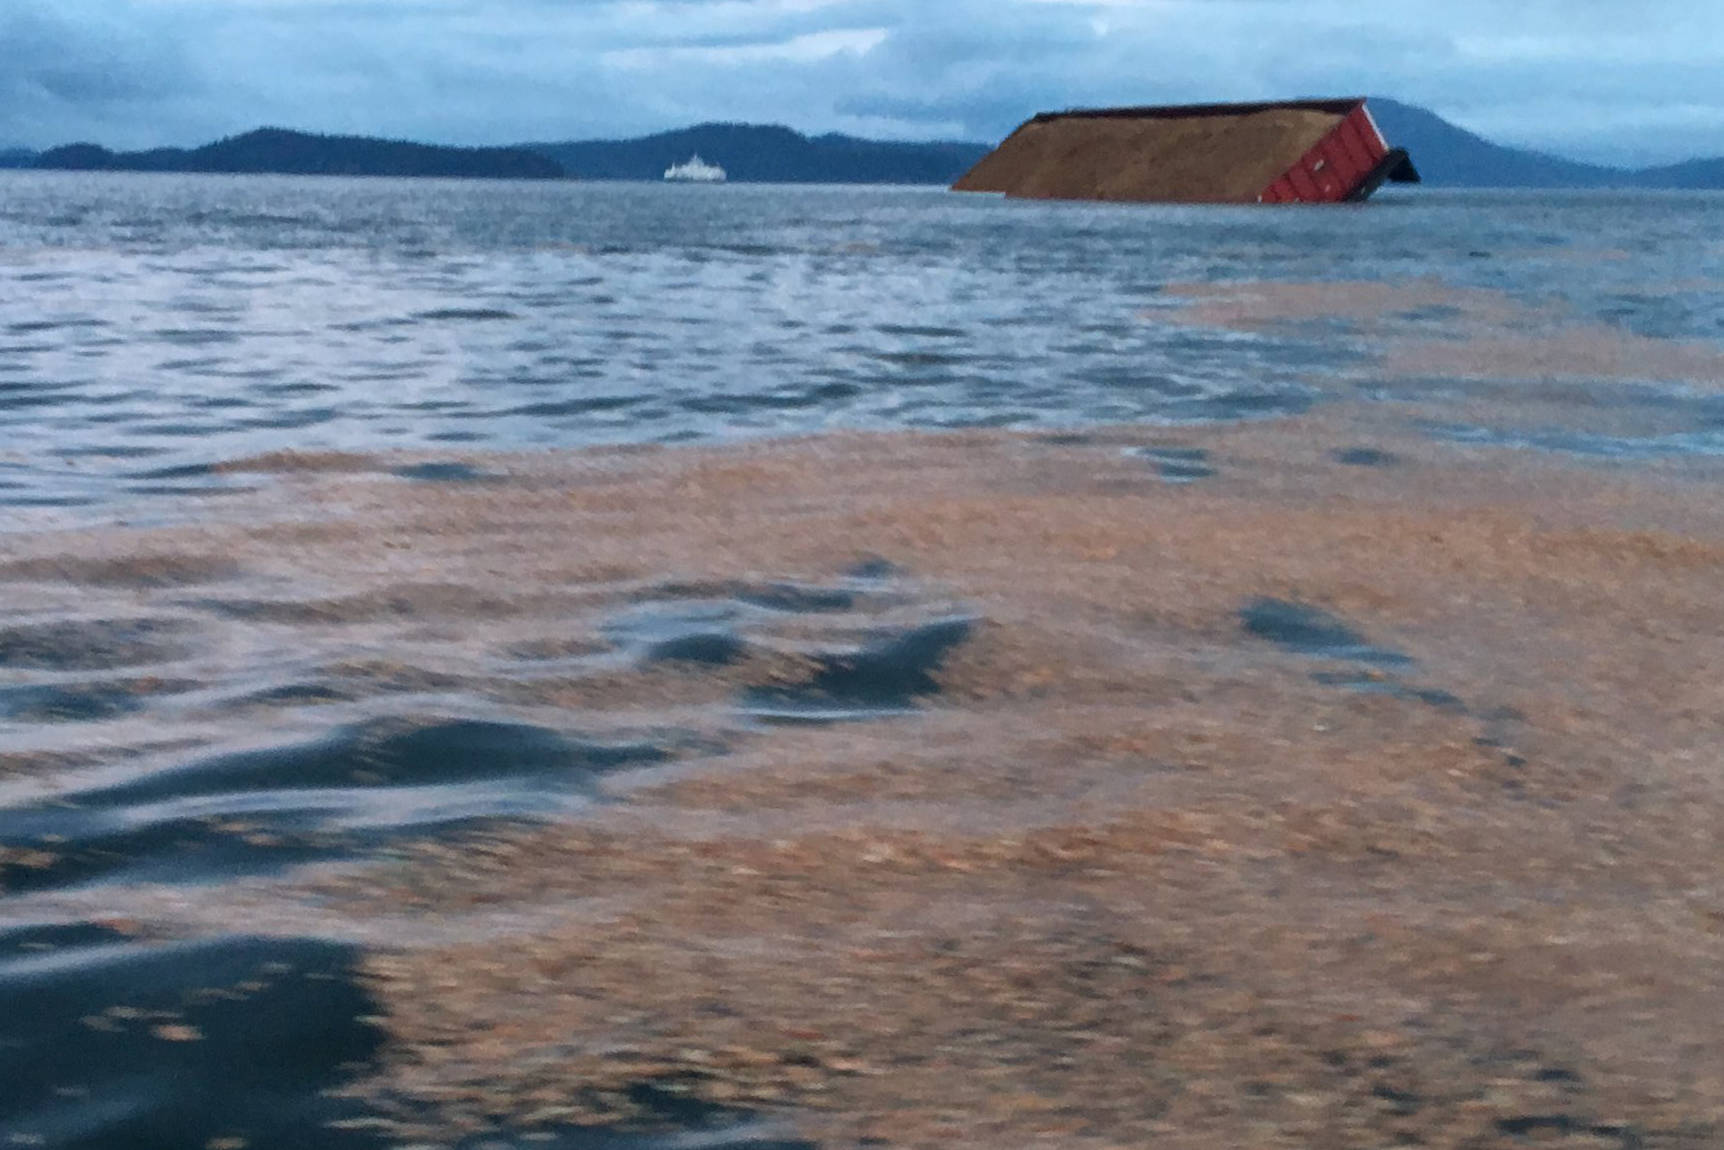 Wood chips float in the Salish Sea between Pender and Saltspring Islands on Wednesday morning. (Ian Hinkle Twitter)                                Wood chips float in the Salish Sea between Pender and Saltspring Islands on Wednesday morning. (Ian Hinkle Twitter)